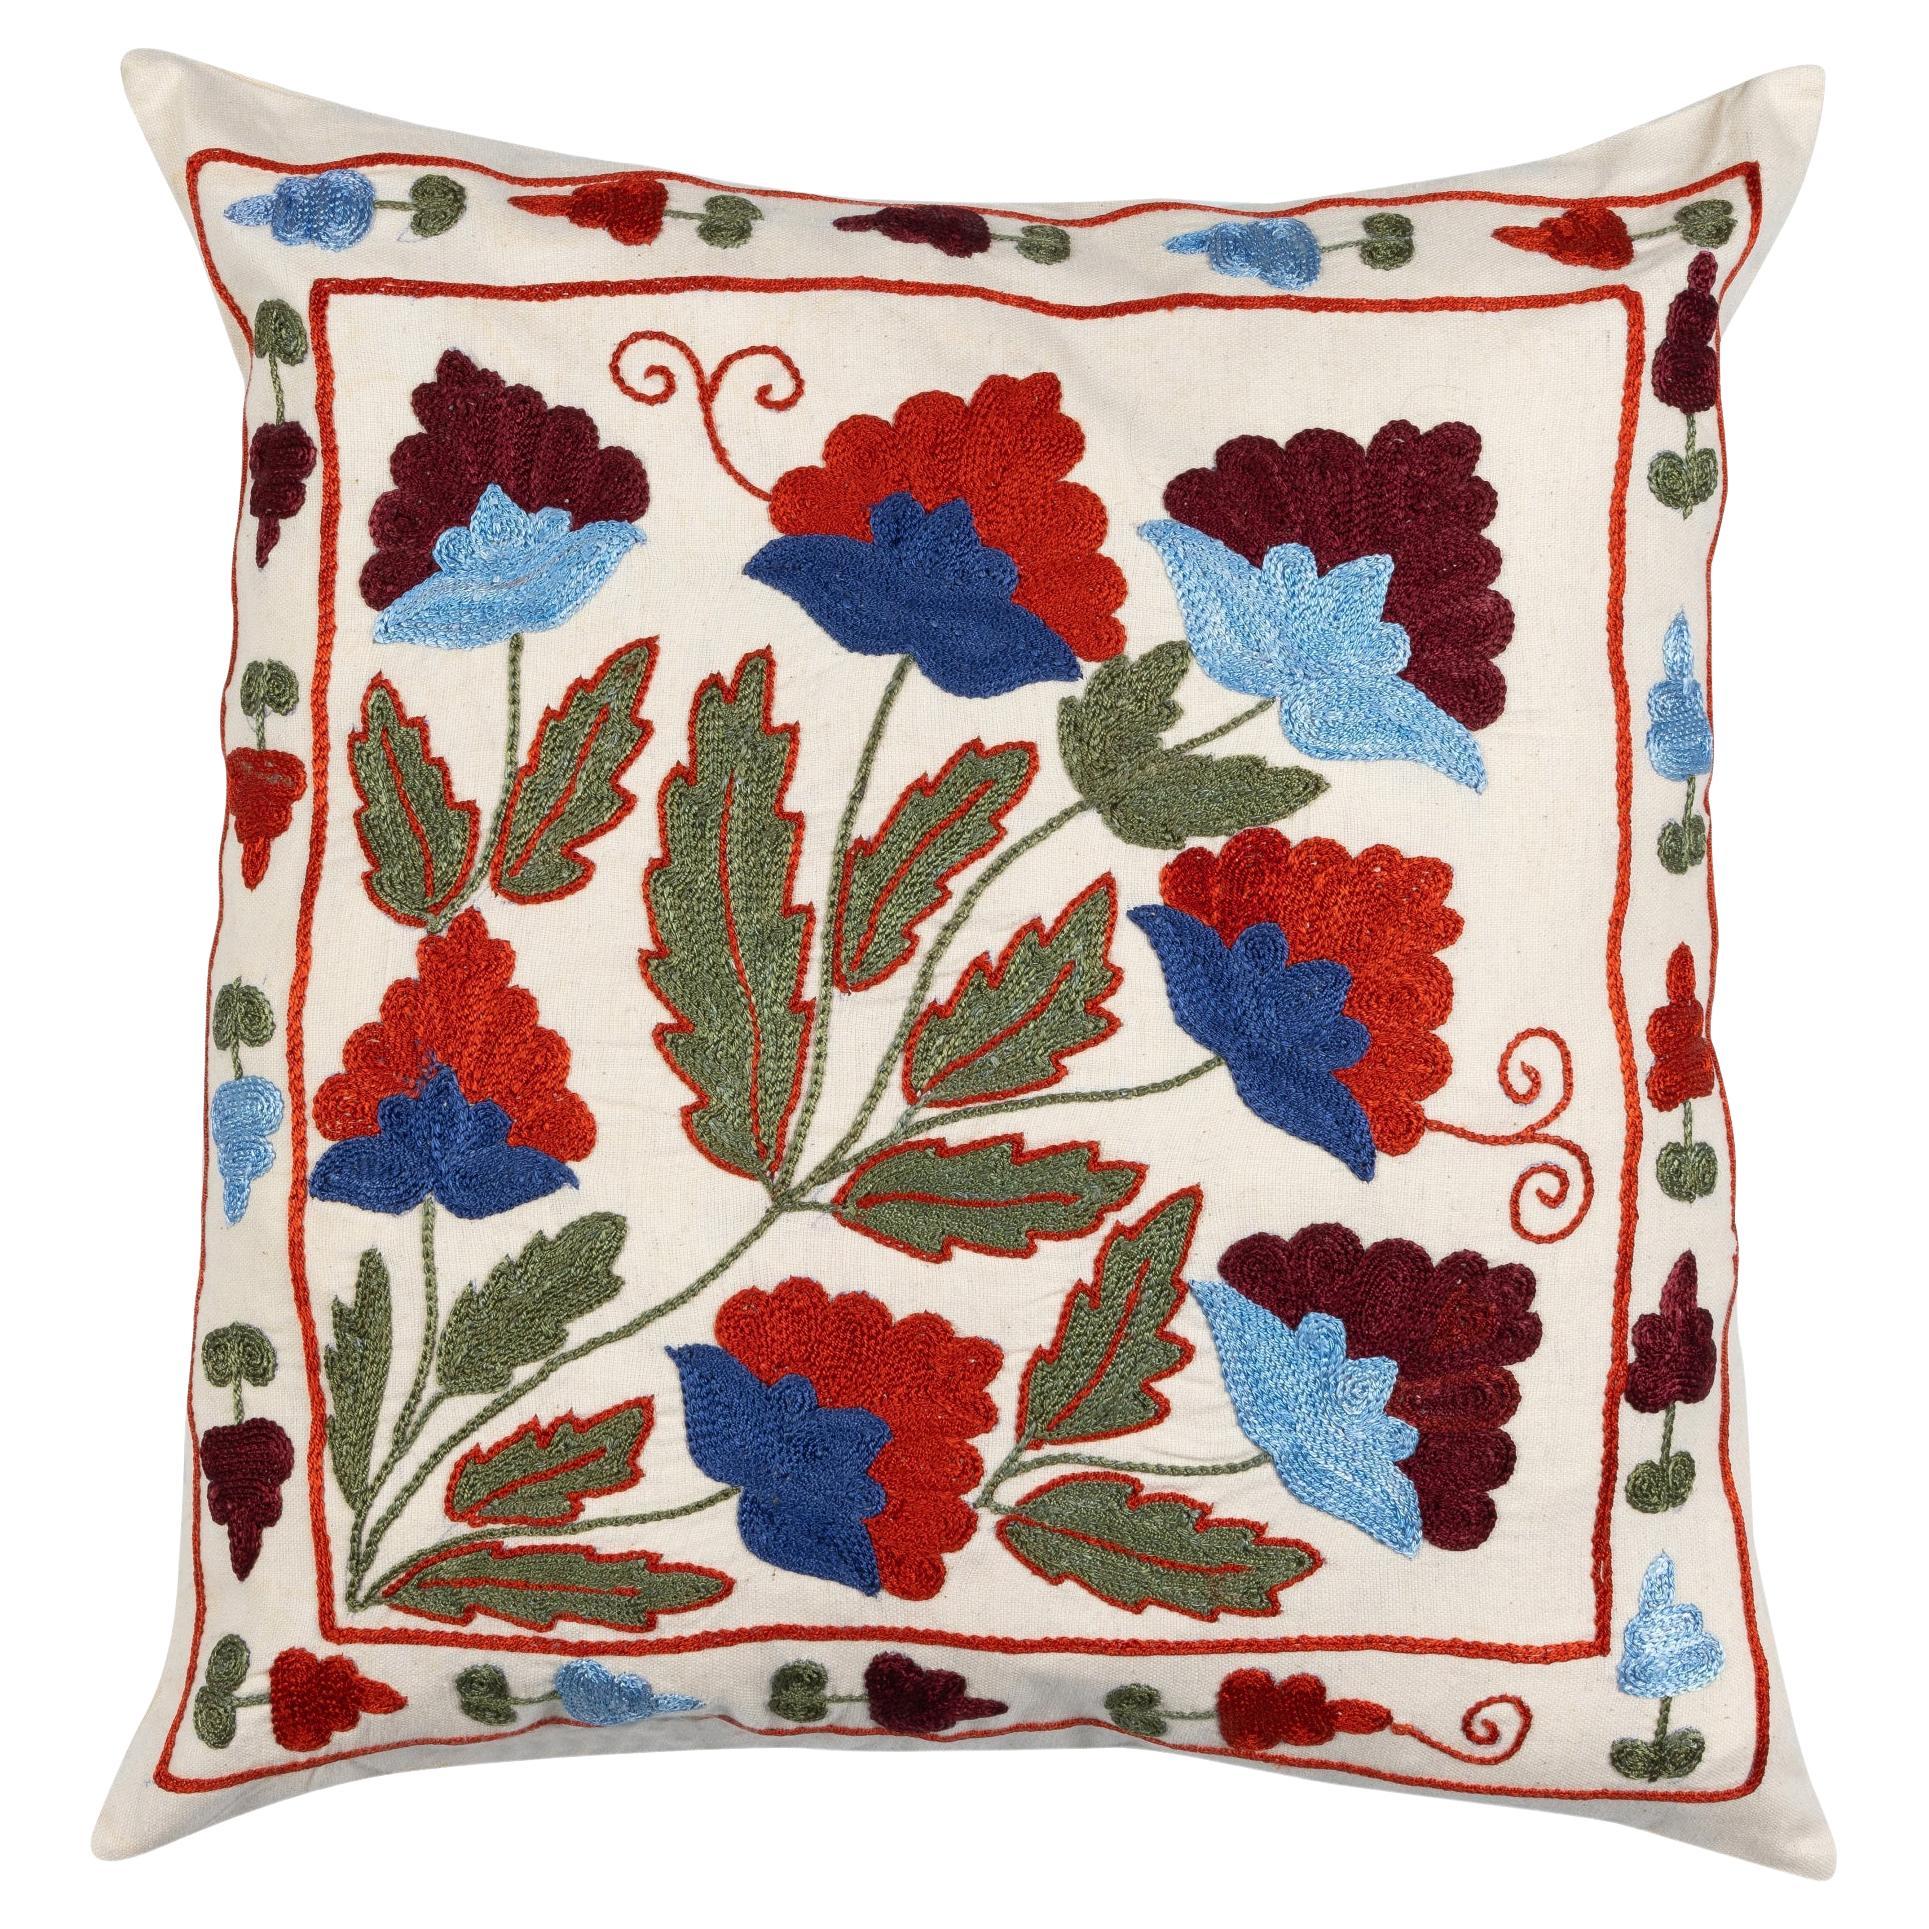 17"x17" Decorative Silk Hand Embroidered Suzani Cushion Cover from Uzbekistan For Sale